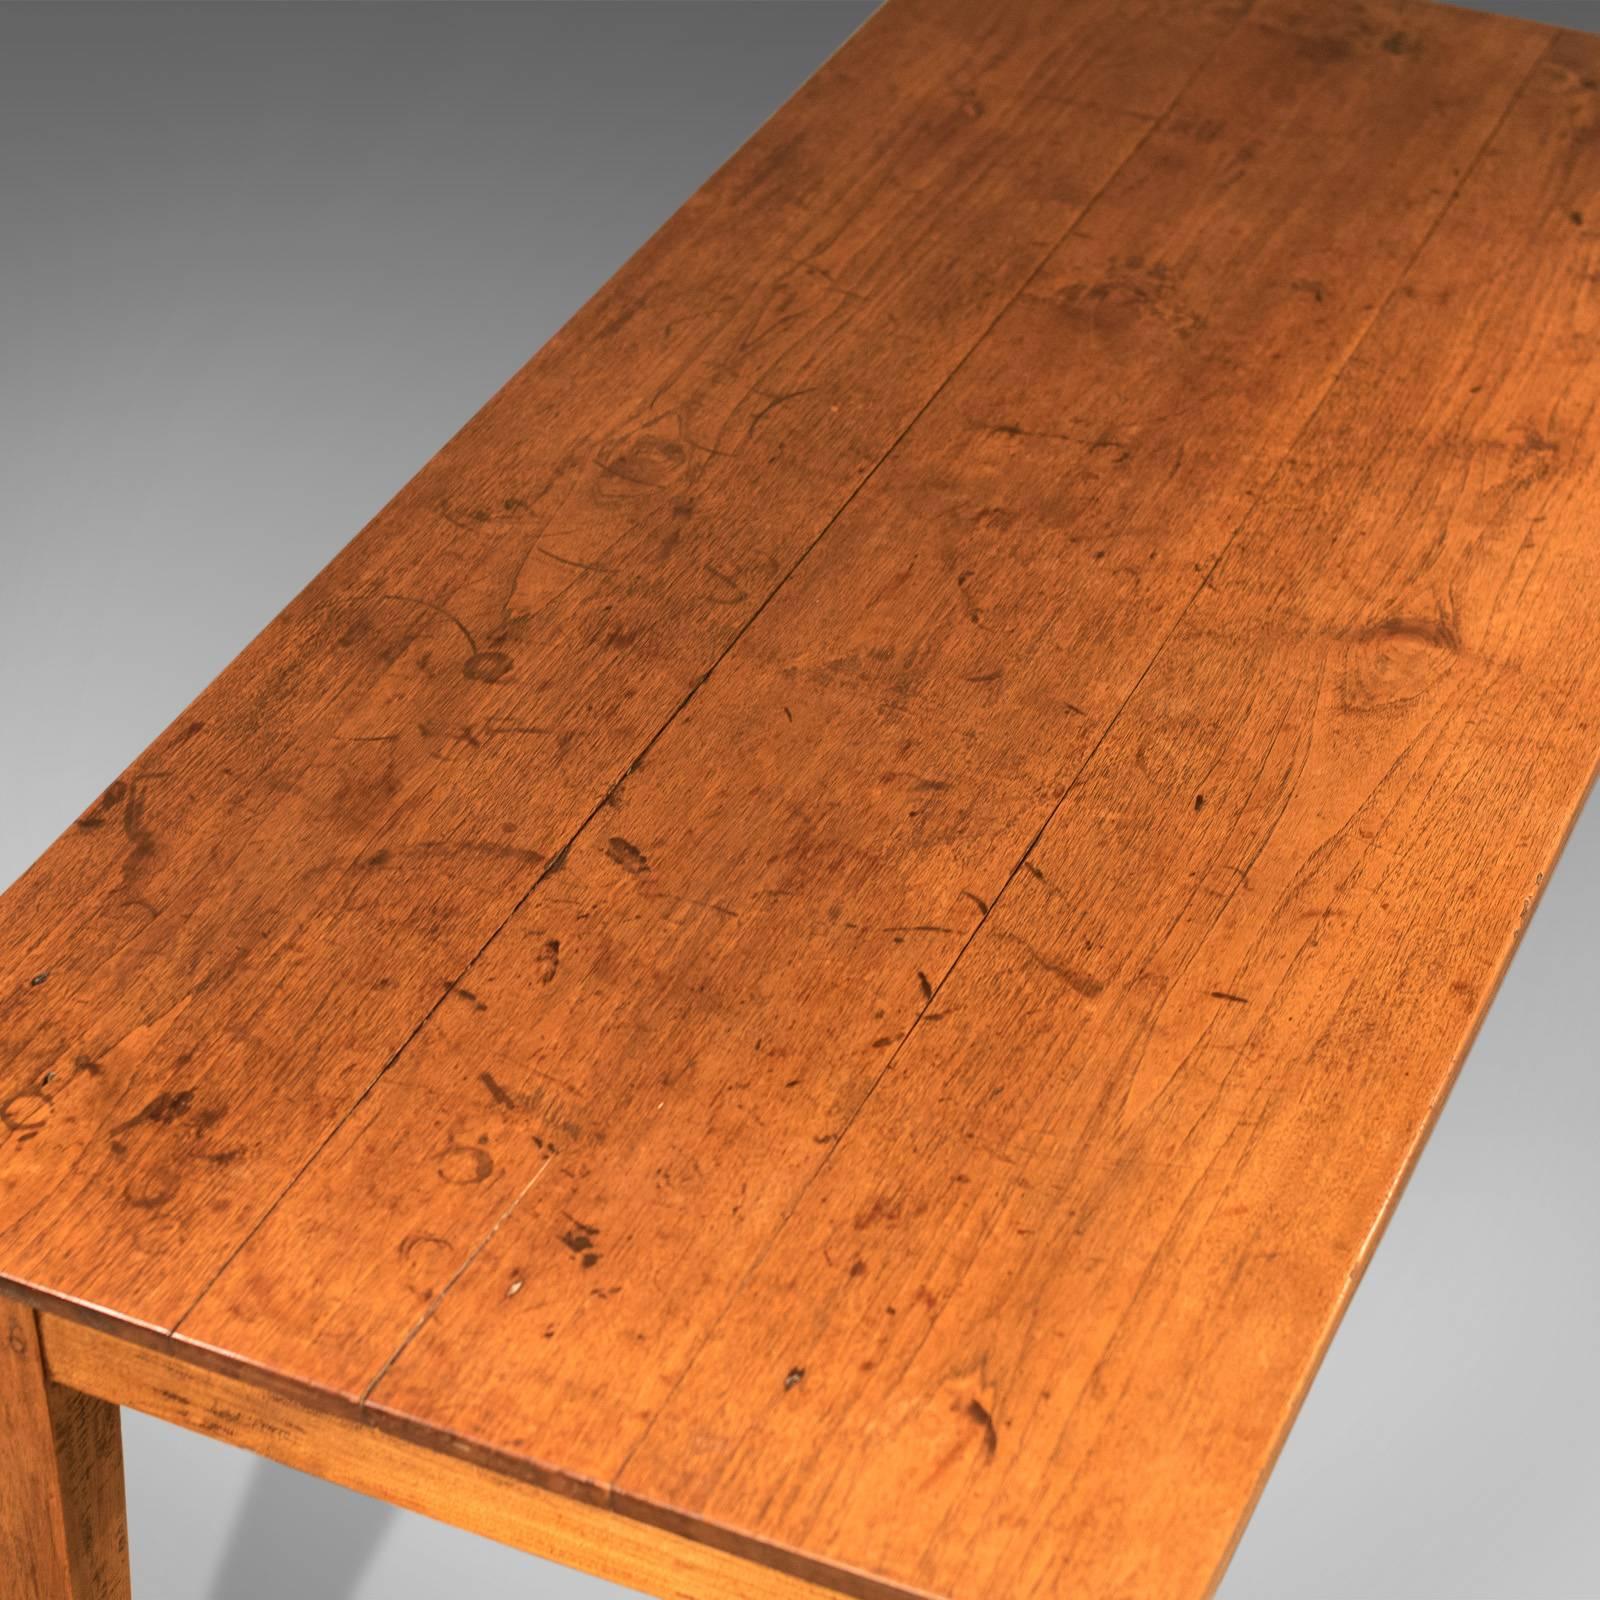 Oak Antique Dining Table, 19th Century French Country Kitchen